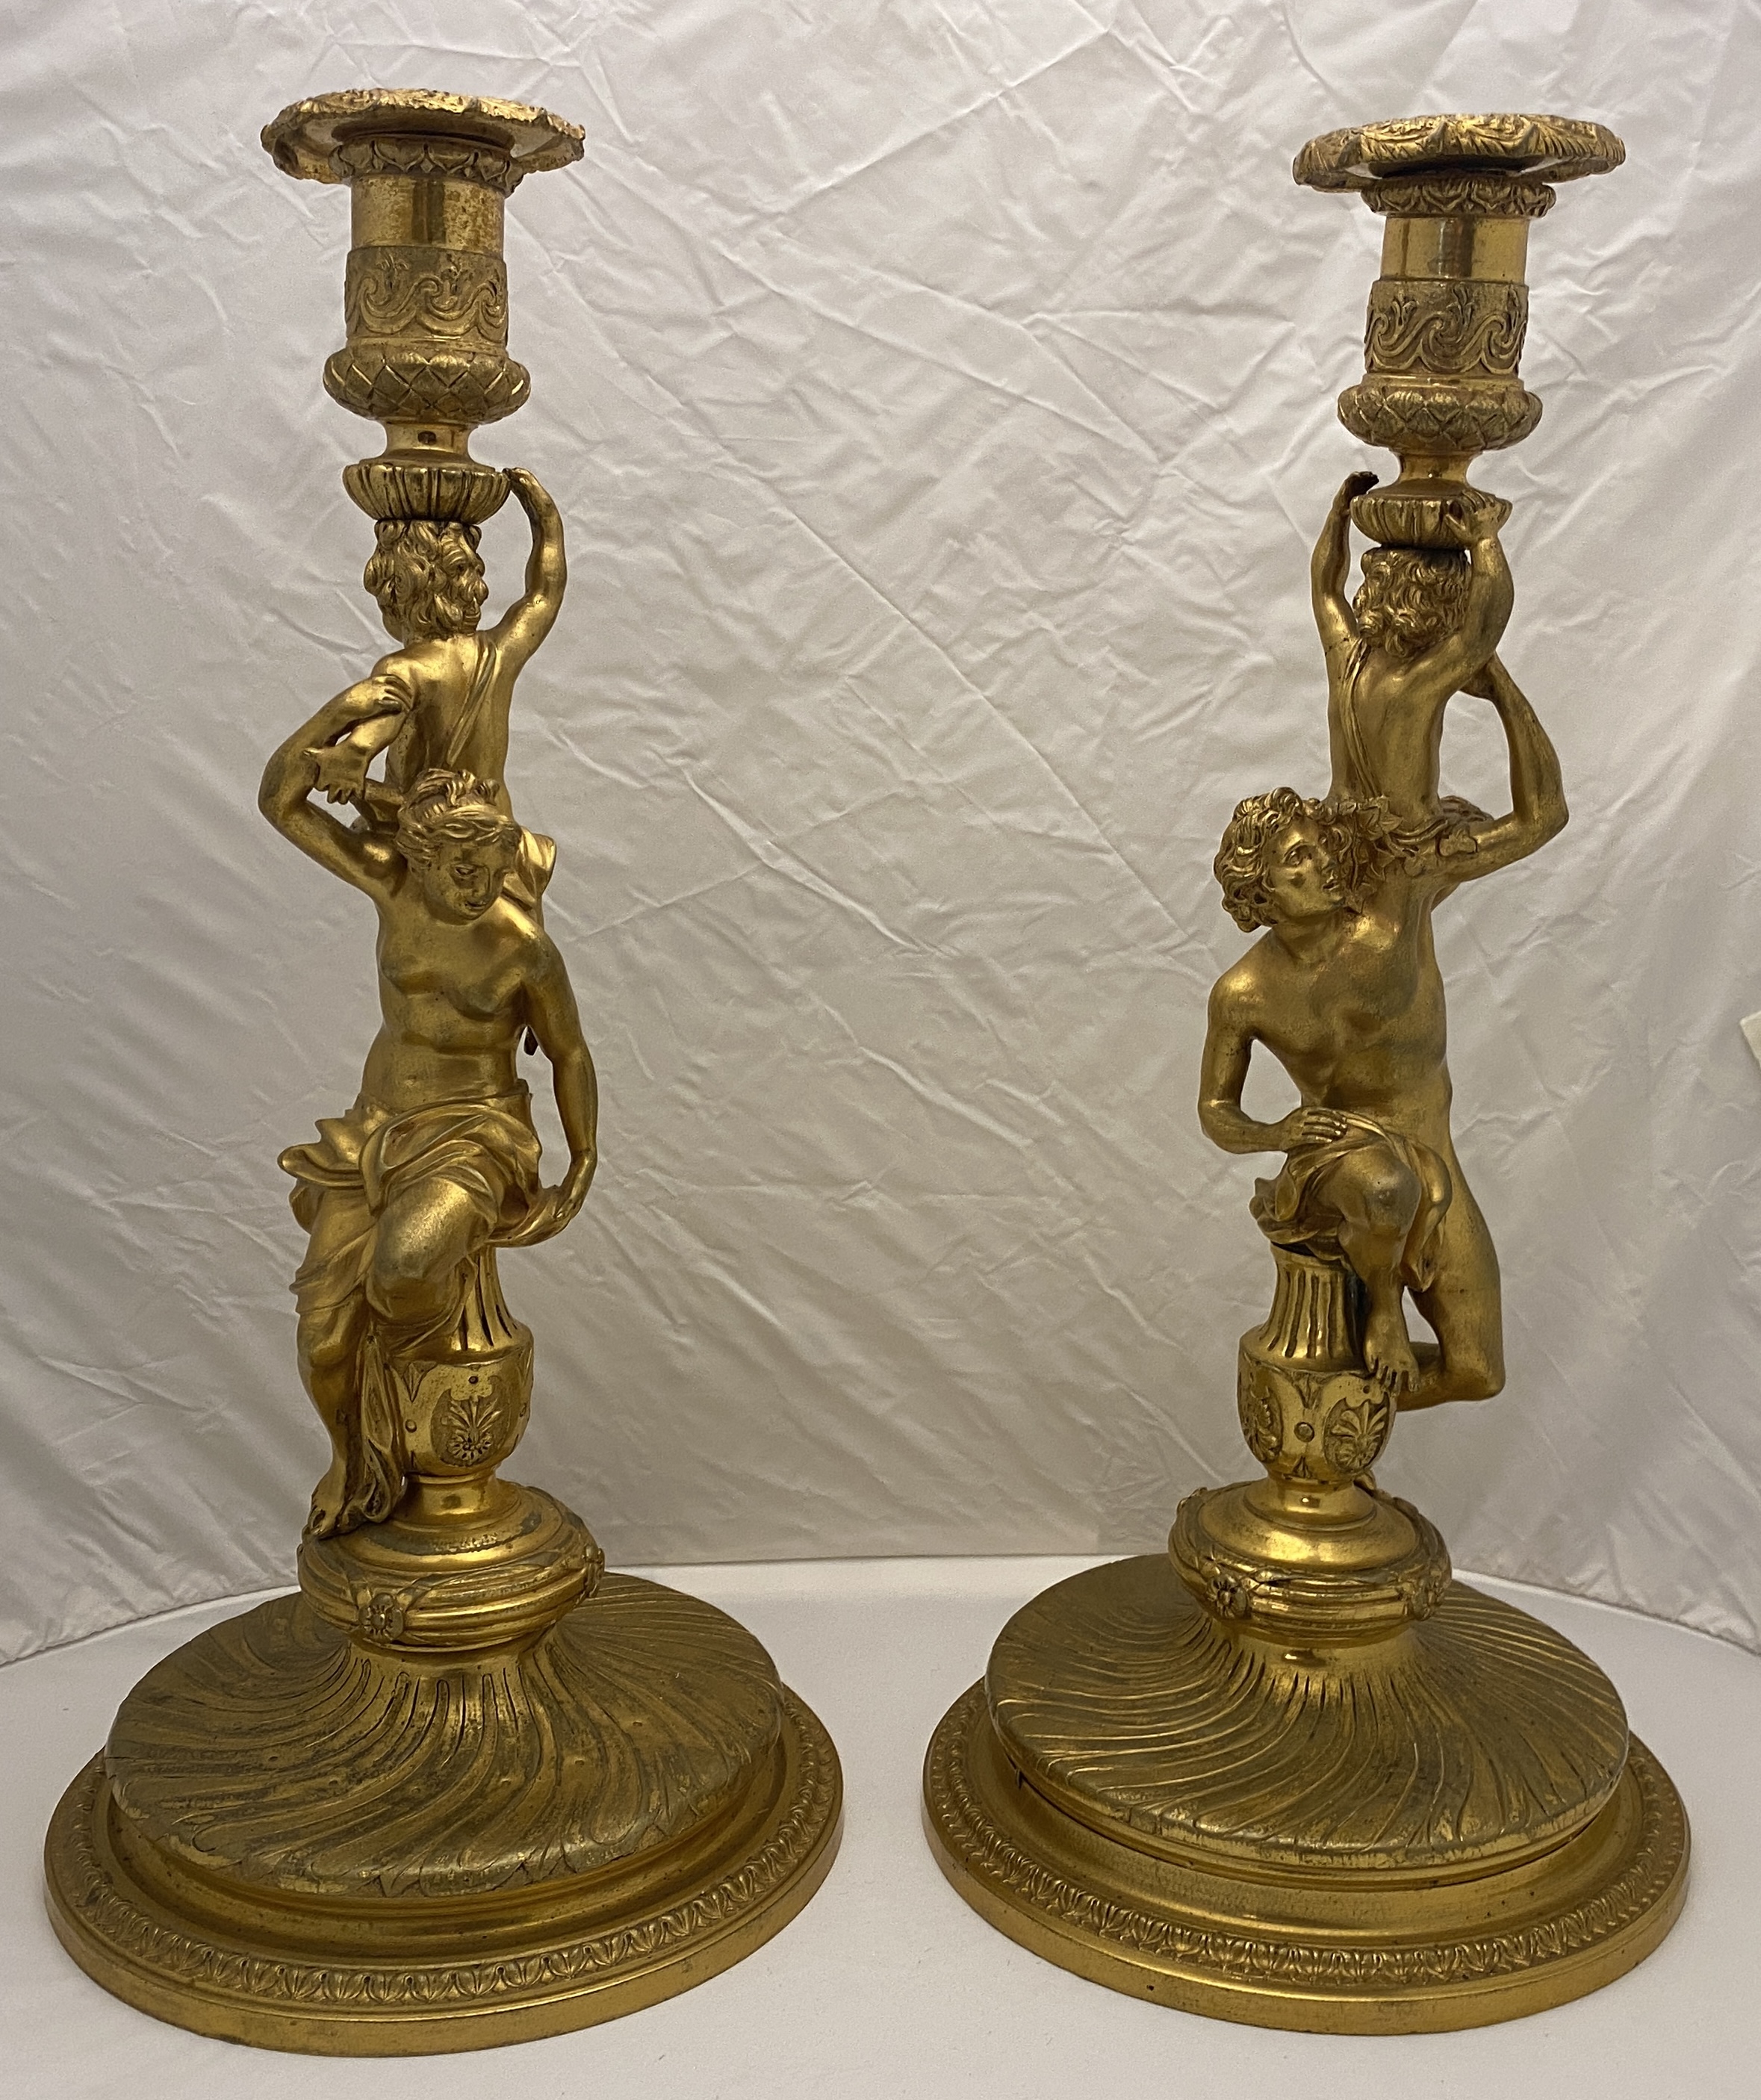 A pair of large 19th century French ormolu candlesticks in the manner of Corneille Van Cleve (French - Image 5 of 5